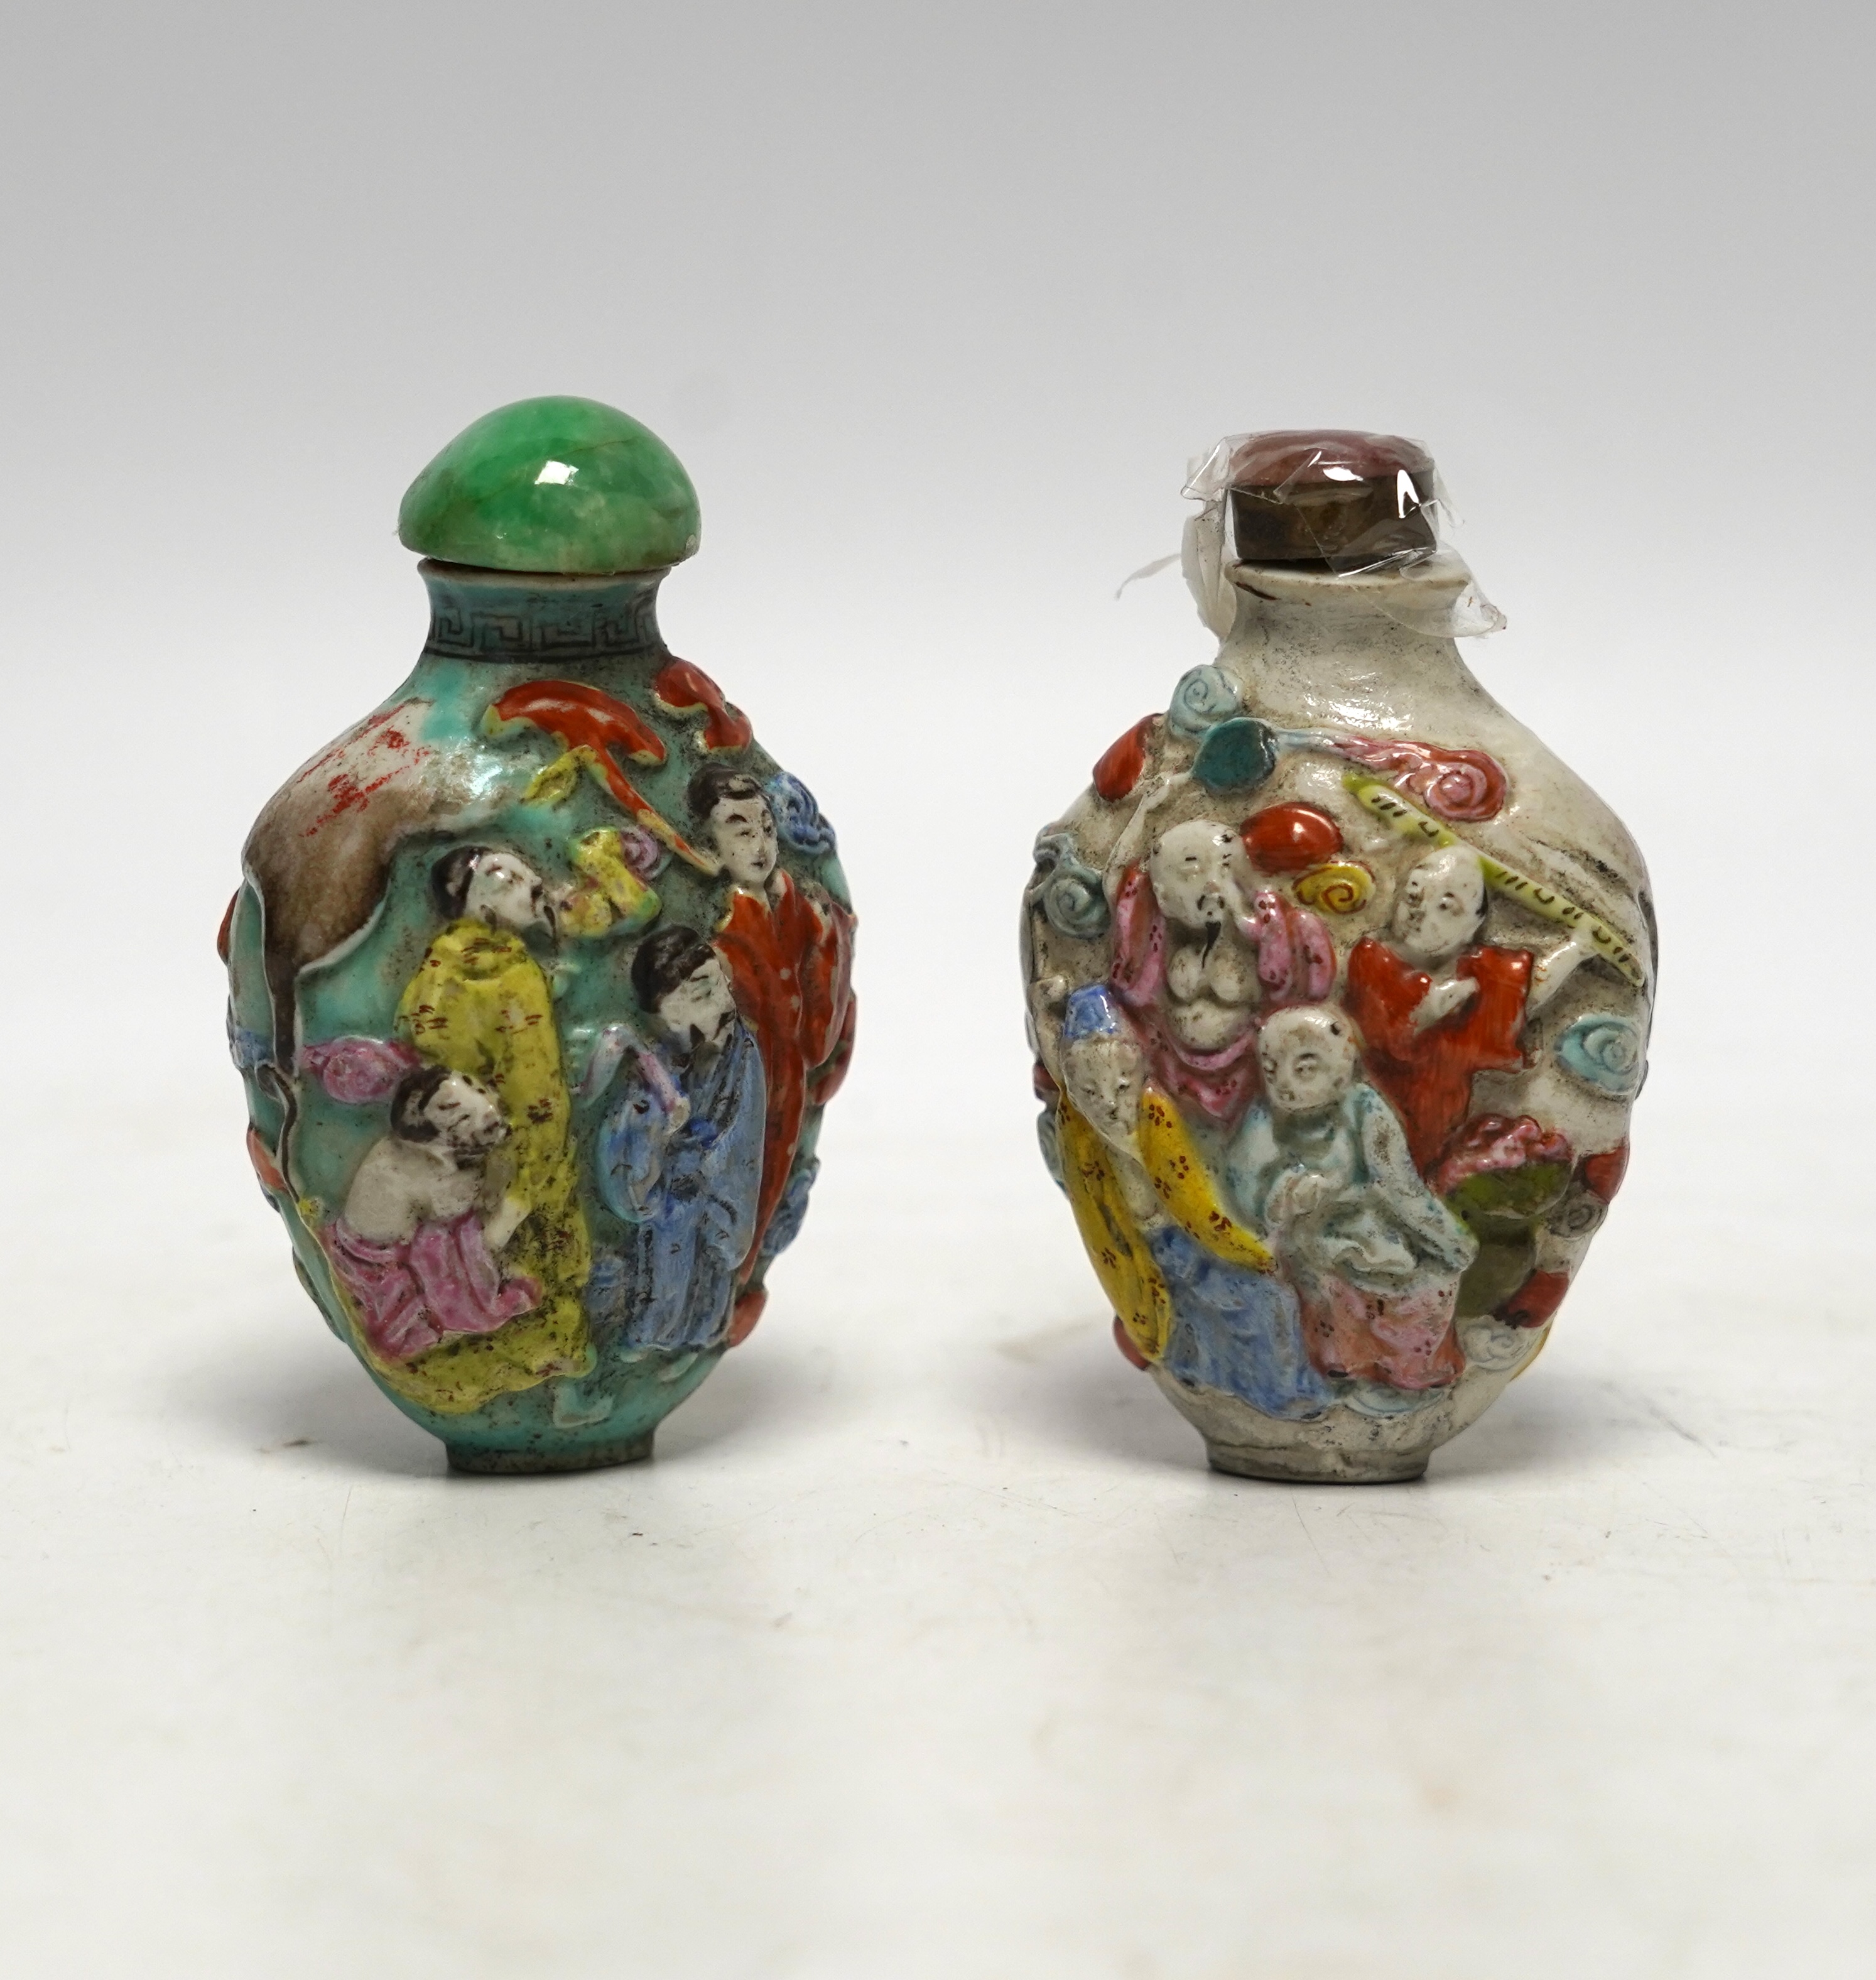 Two 19th century Chinese moulded and enamelled porcelain ’eight immortals’ snuff bottles, largest 8cm high